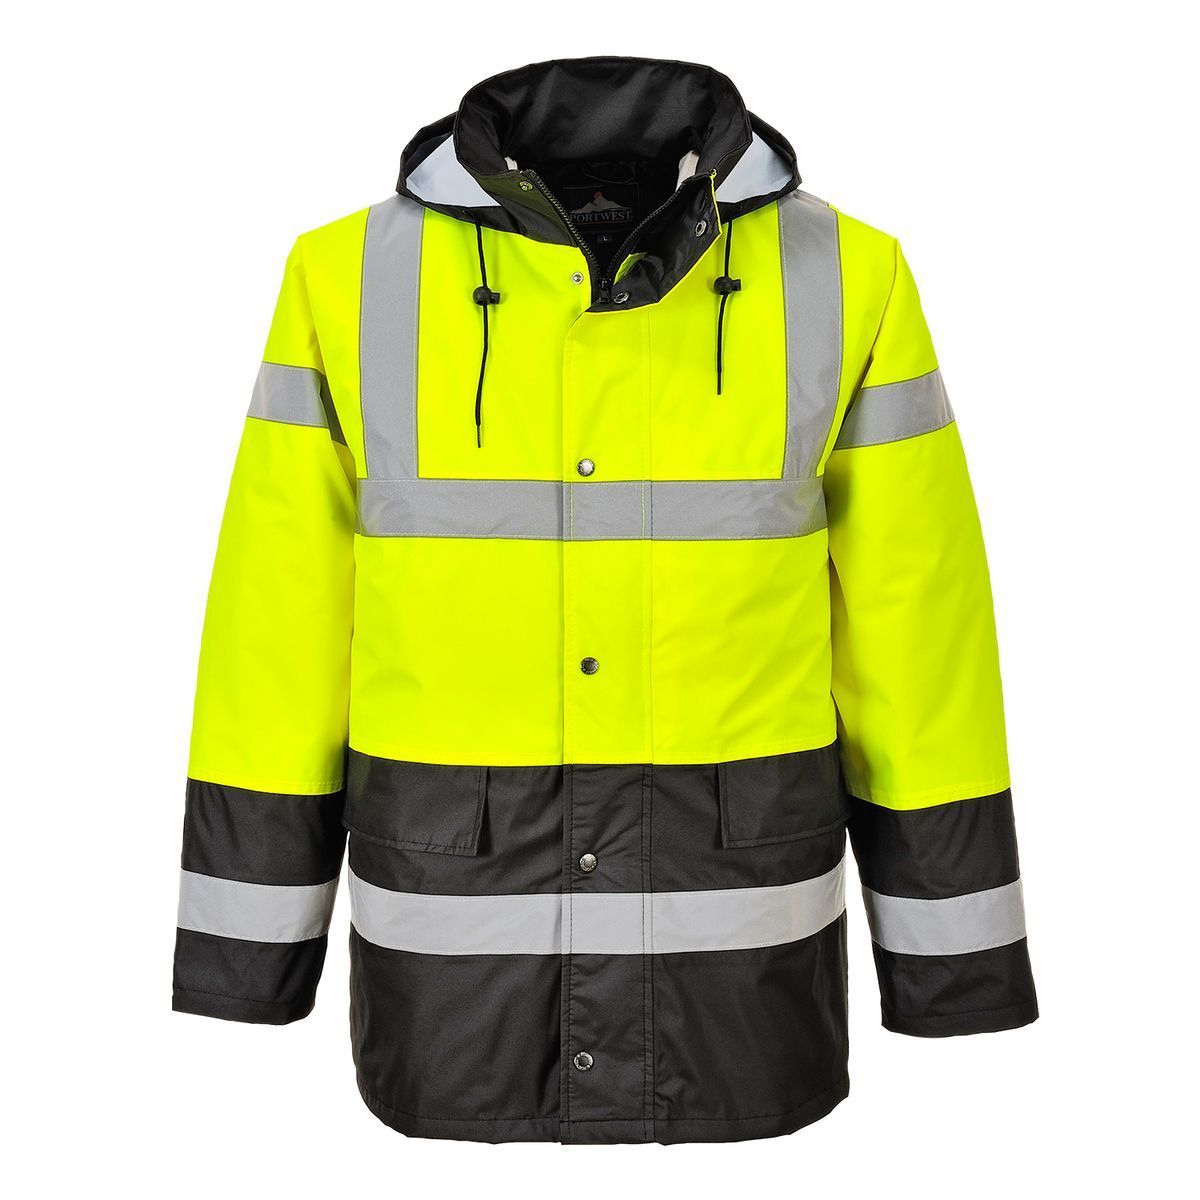 Style US466 HiVis Contrast Traffic Jacket-2